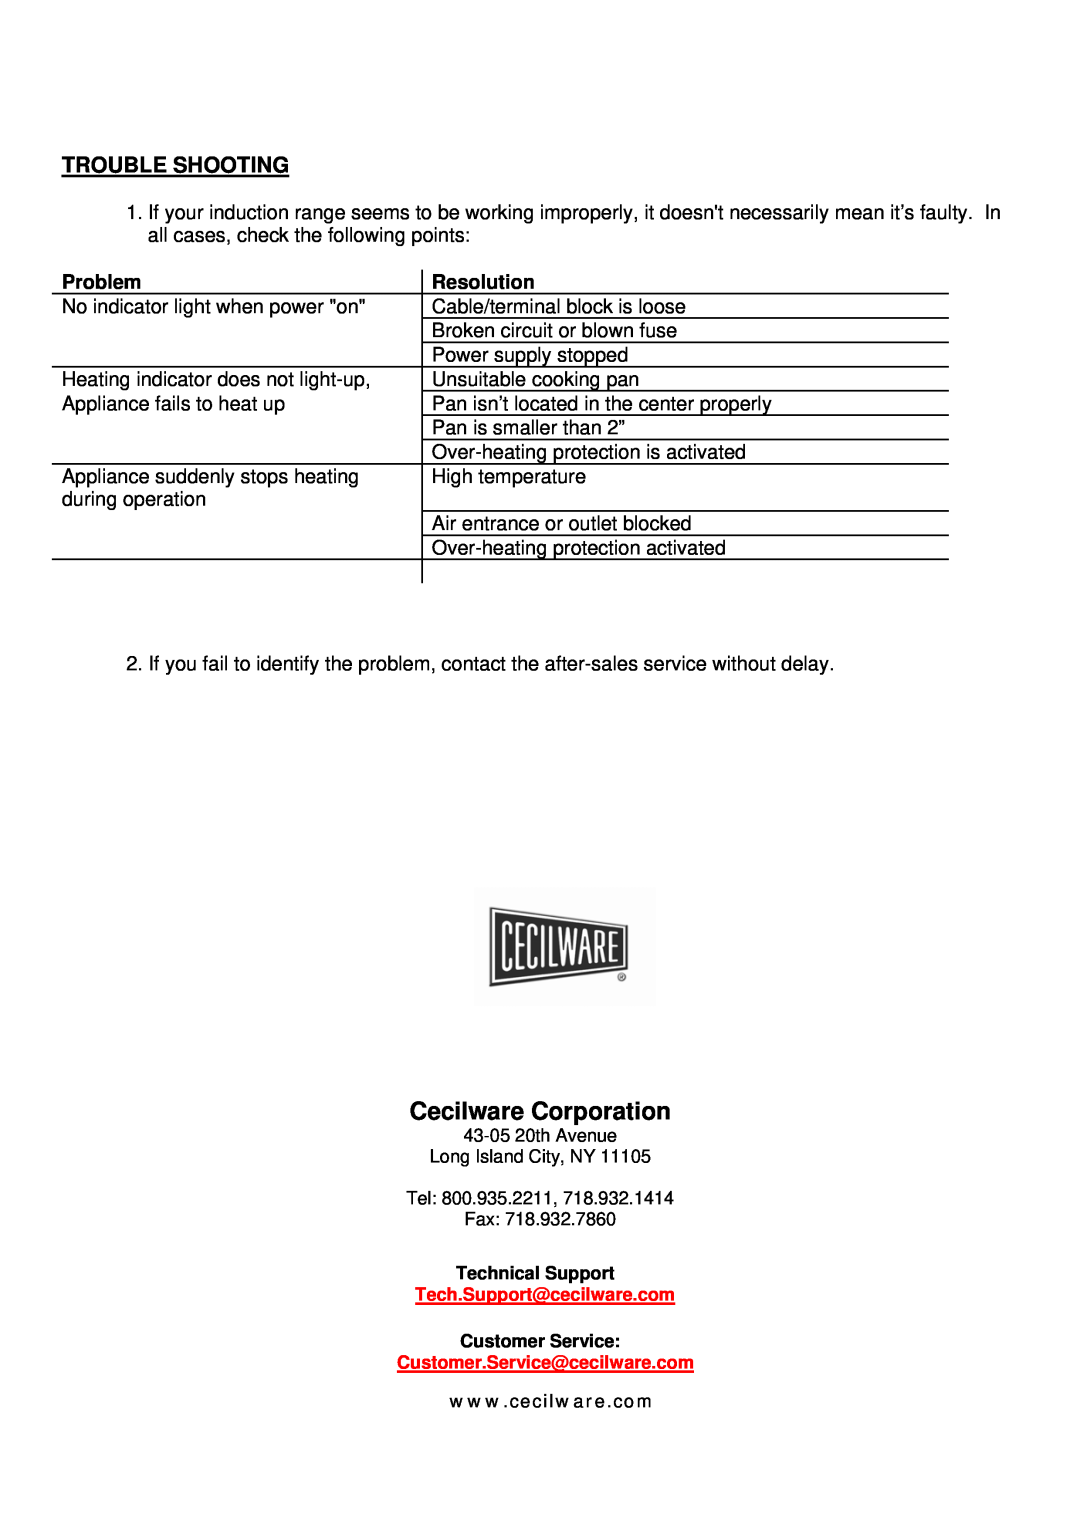 Cecilware IC-25A, IC-18A, IC-22A operation manual Cecilware Corporation, Trouble Shooting, Problem, Resolution 